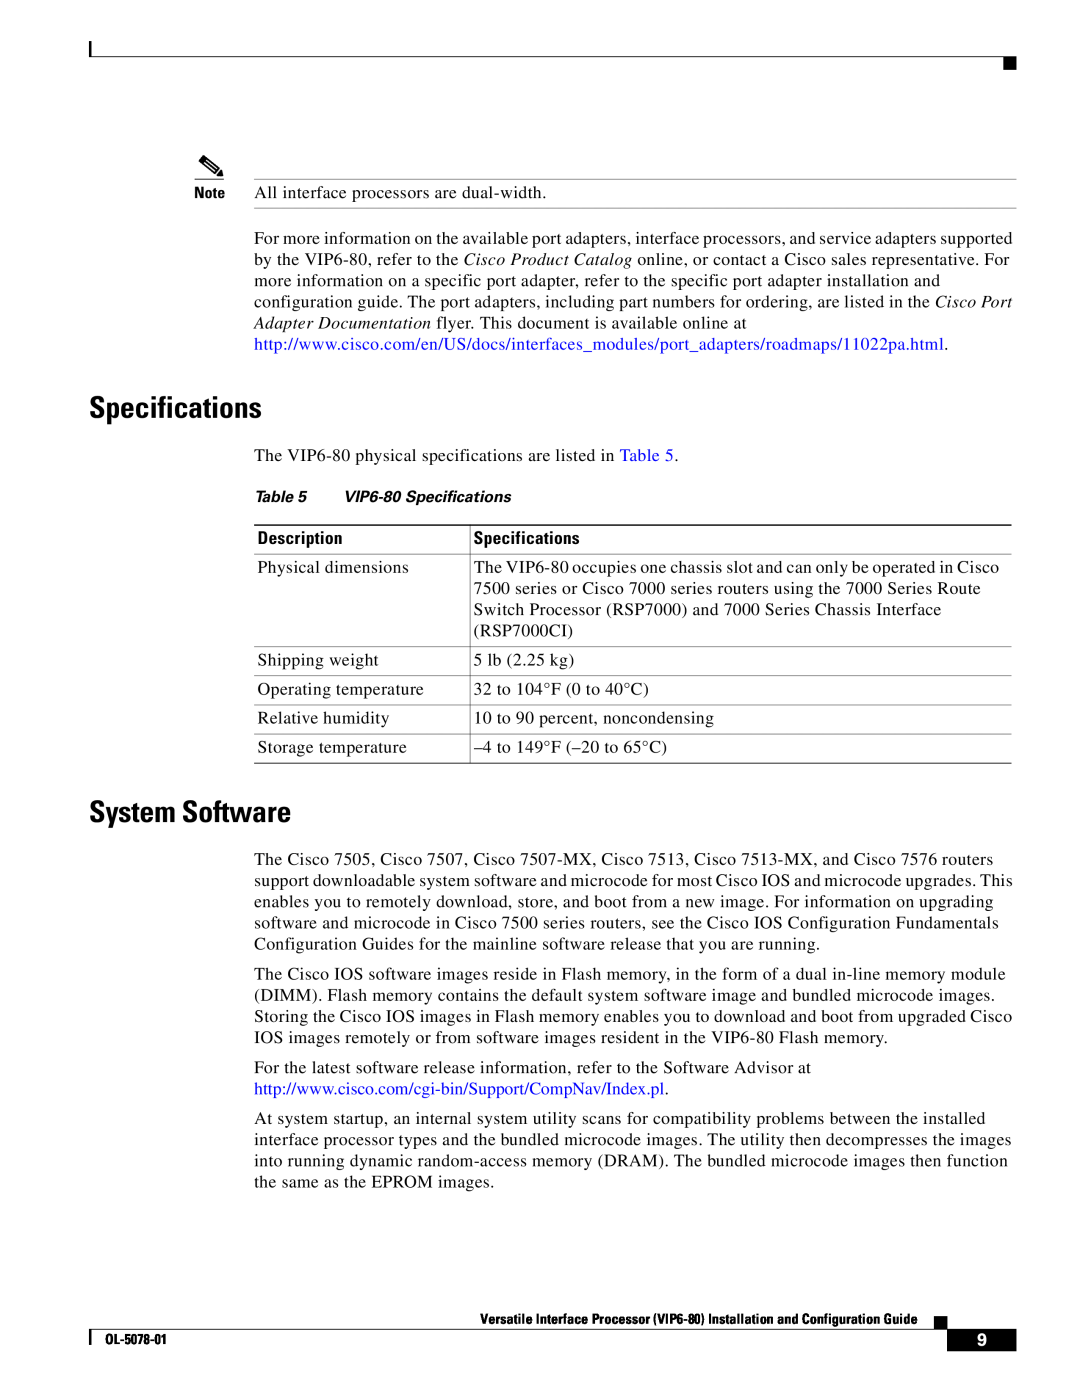 Cisco Systems (VIP6-80) manual Specifications, System Software, Description 